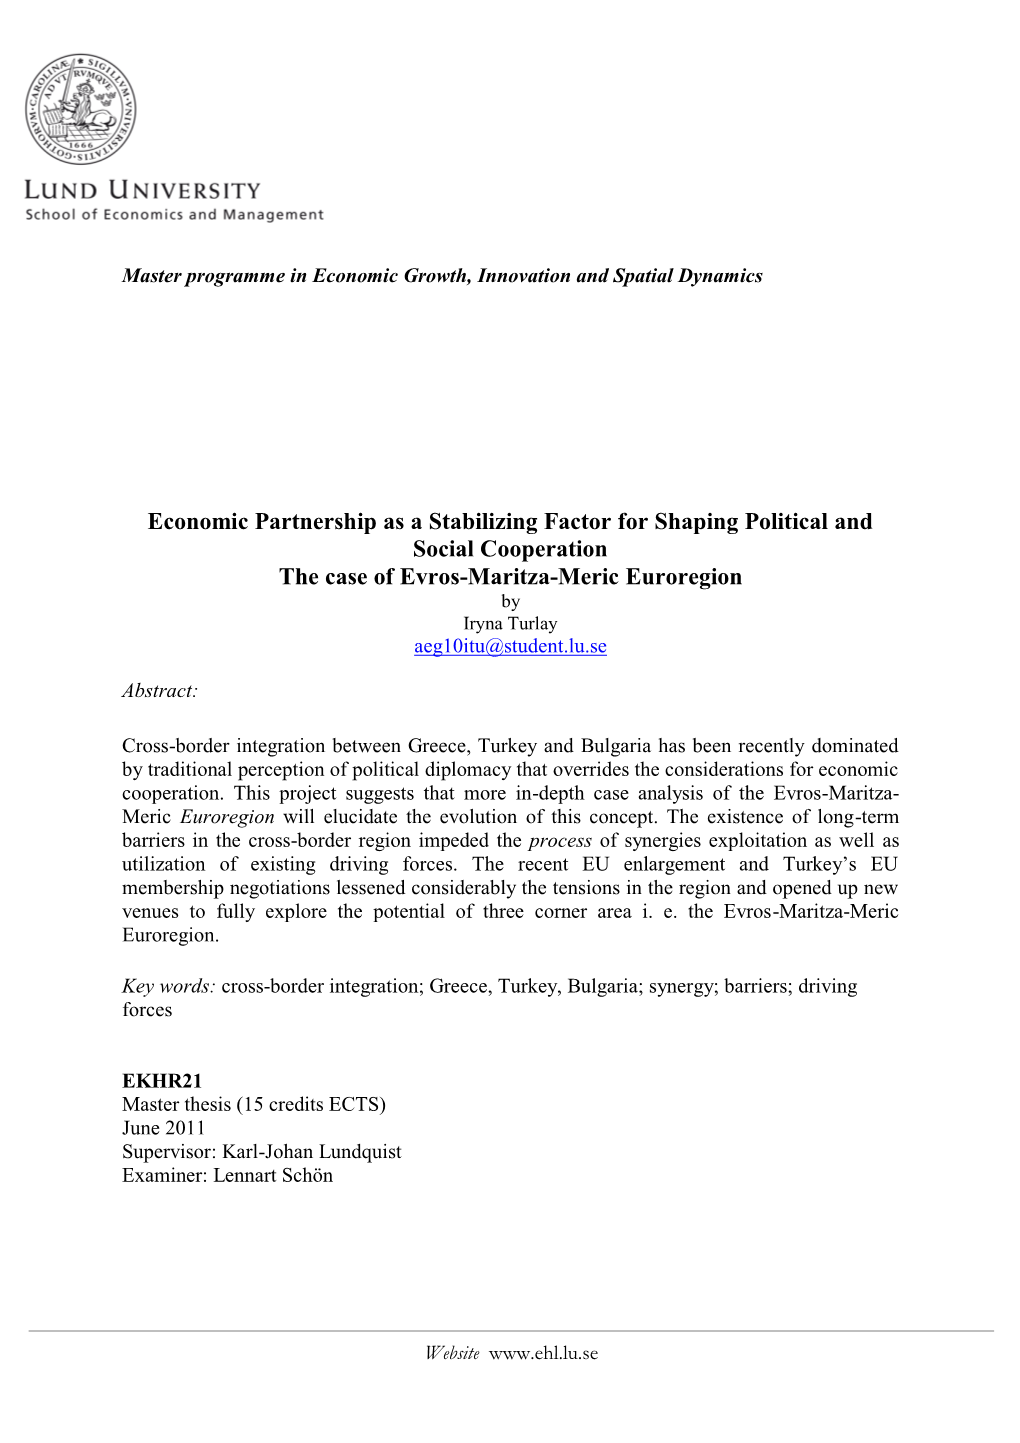 Economic Partnership As a Stabilizing Factor for Shaping Political and Social Cooperation the Case of Evros-Maritza-Meric Eurore